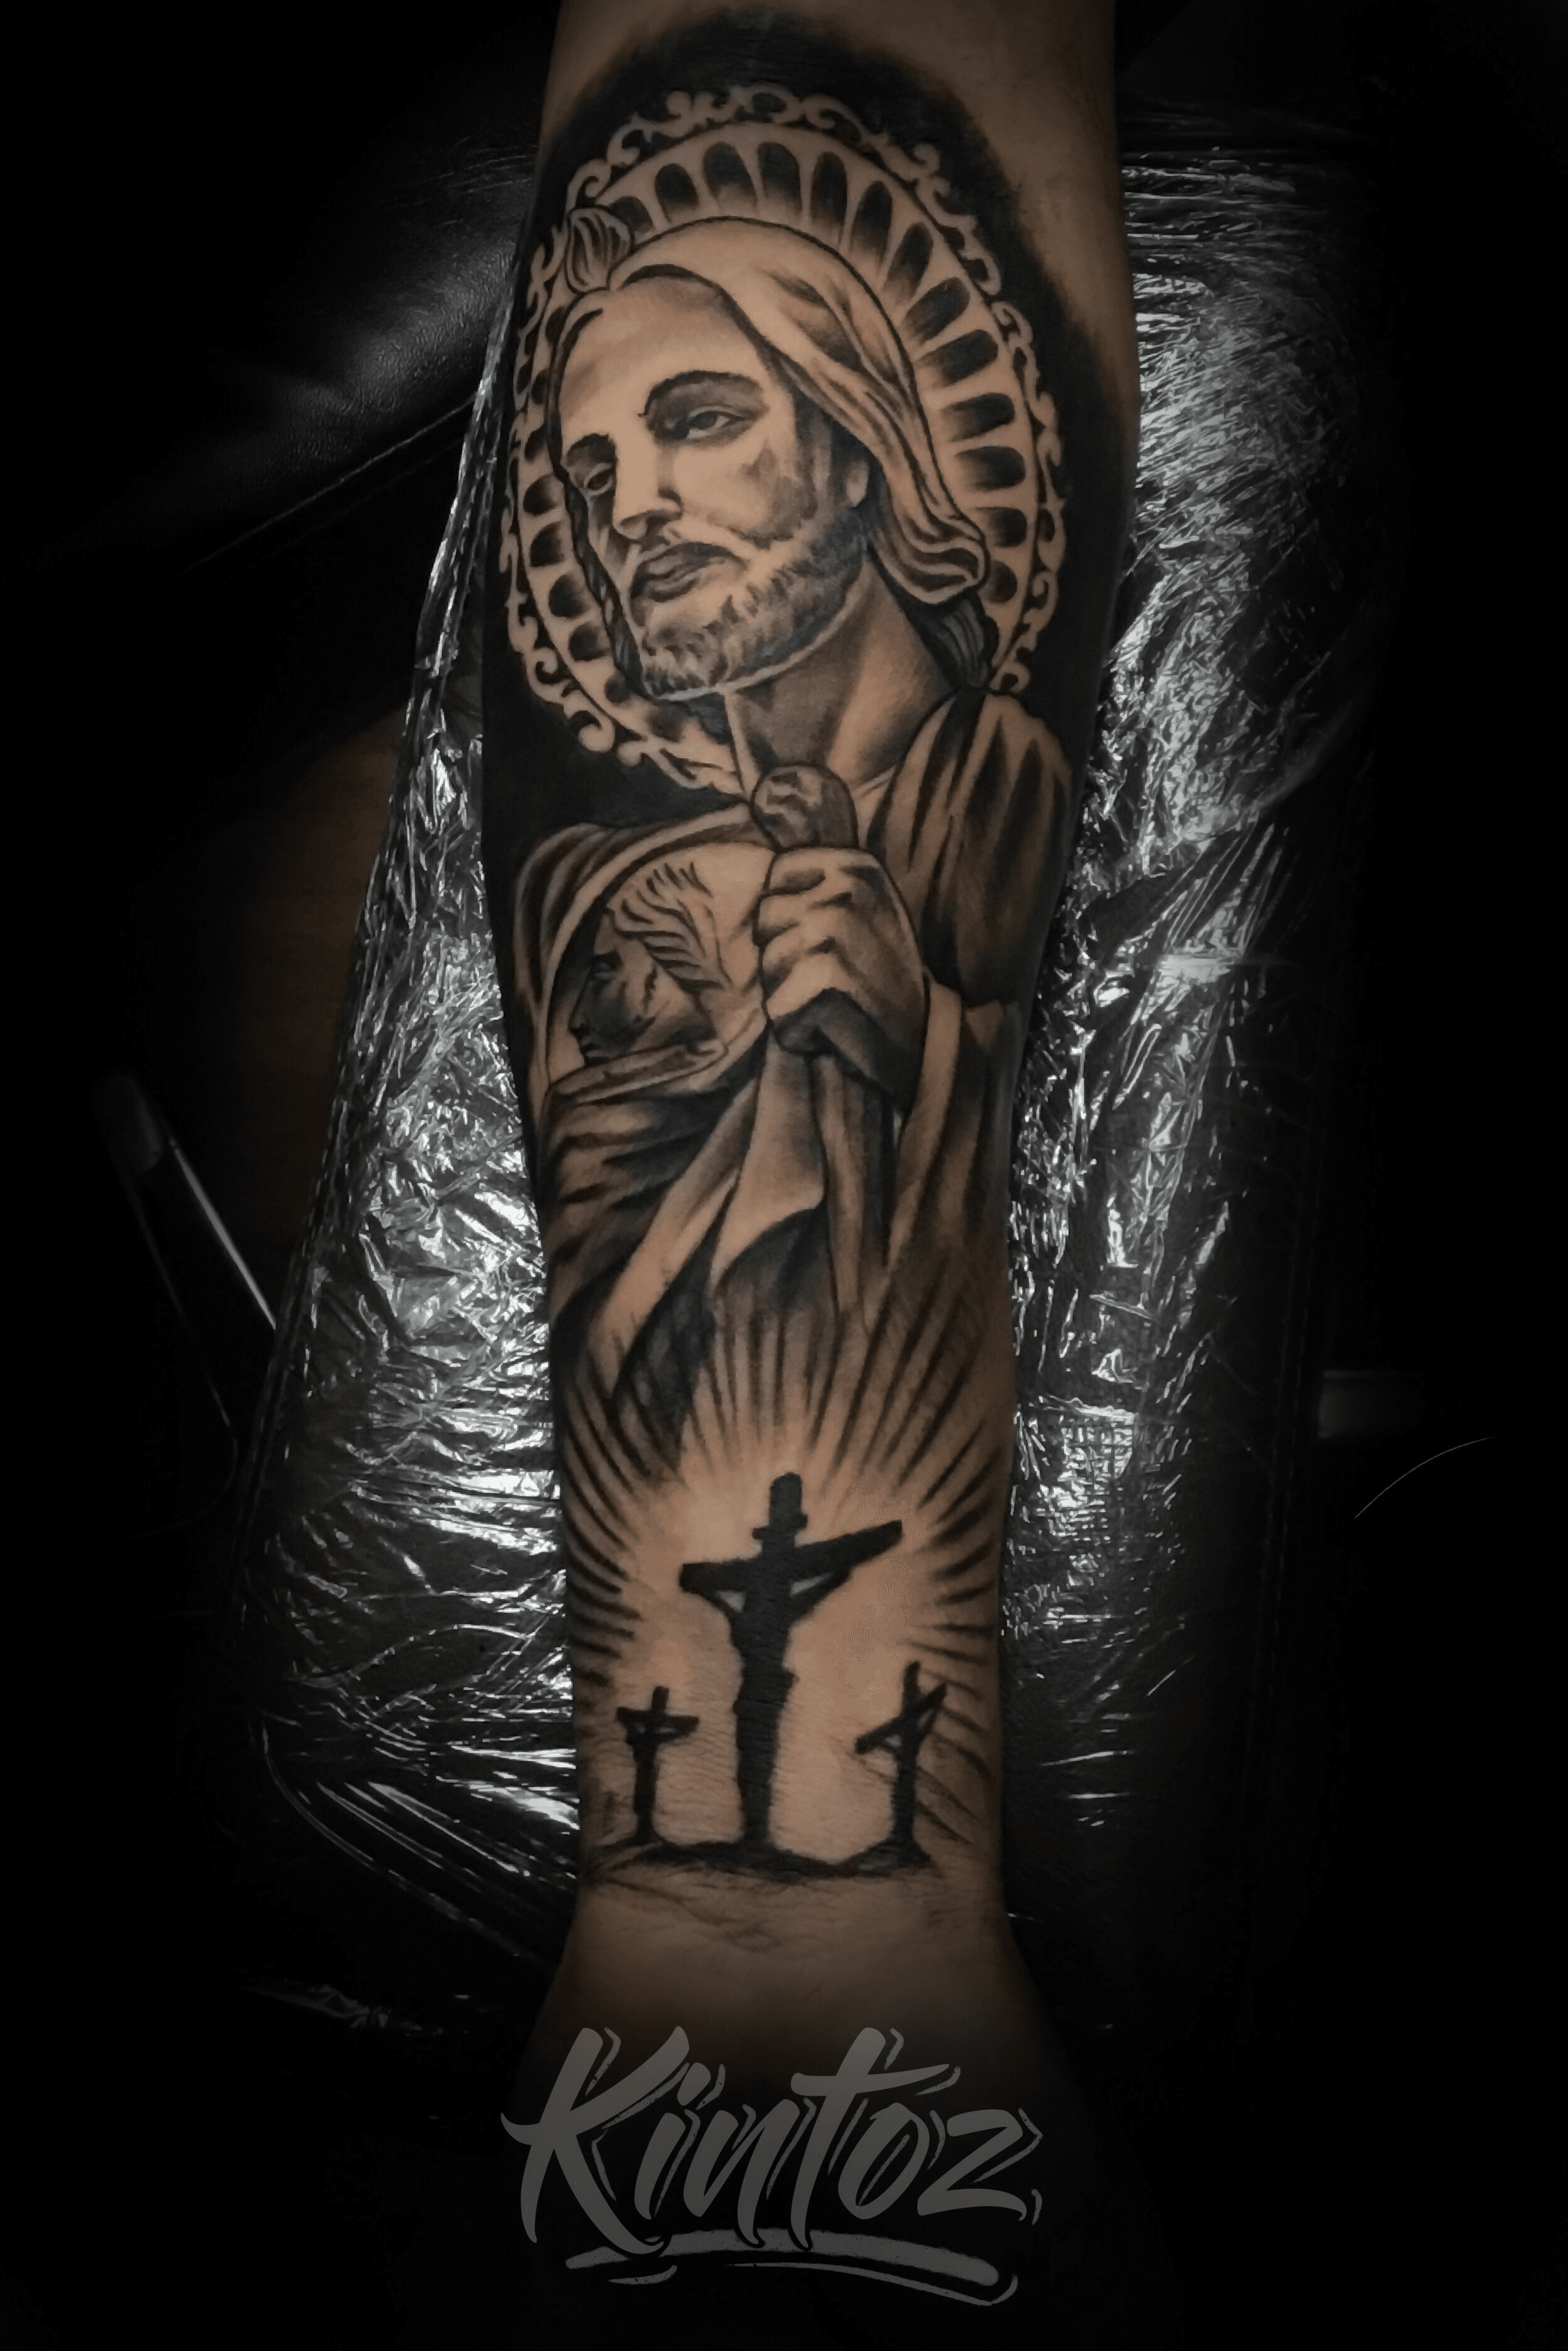 The Art and Significance of San Judas Tadeo Tattoos